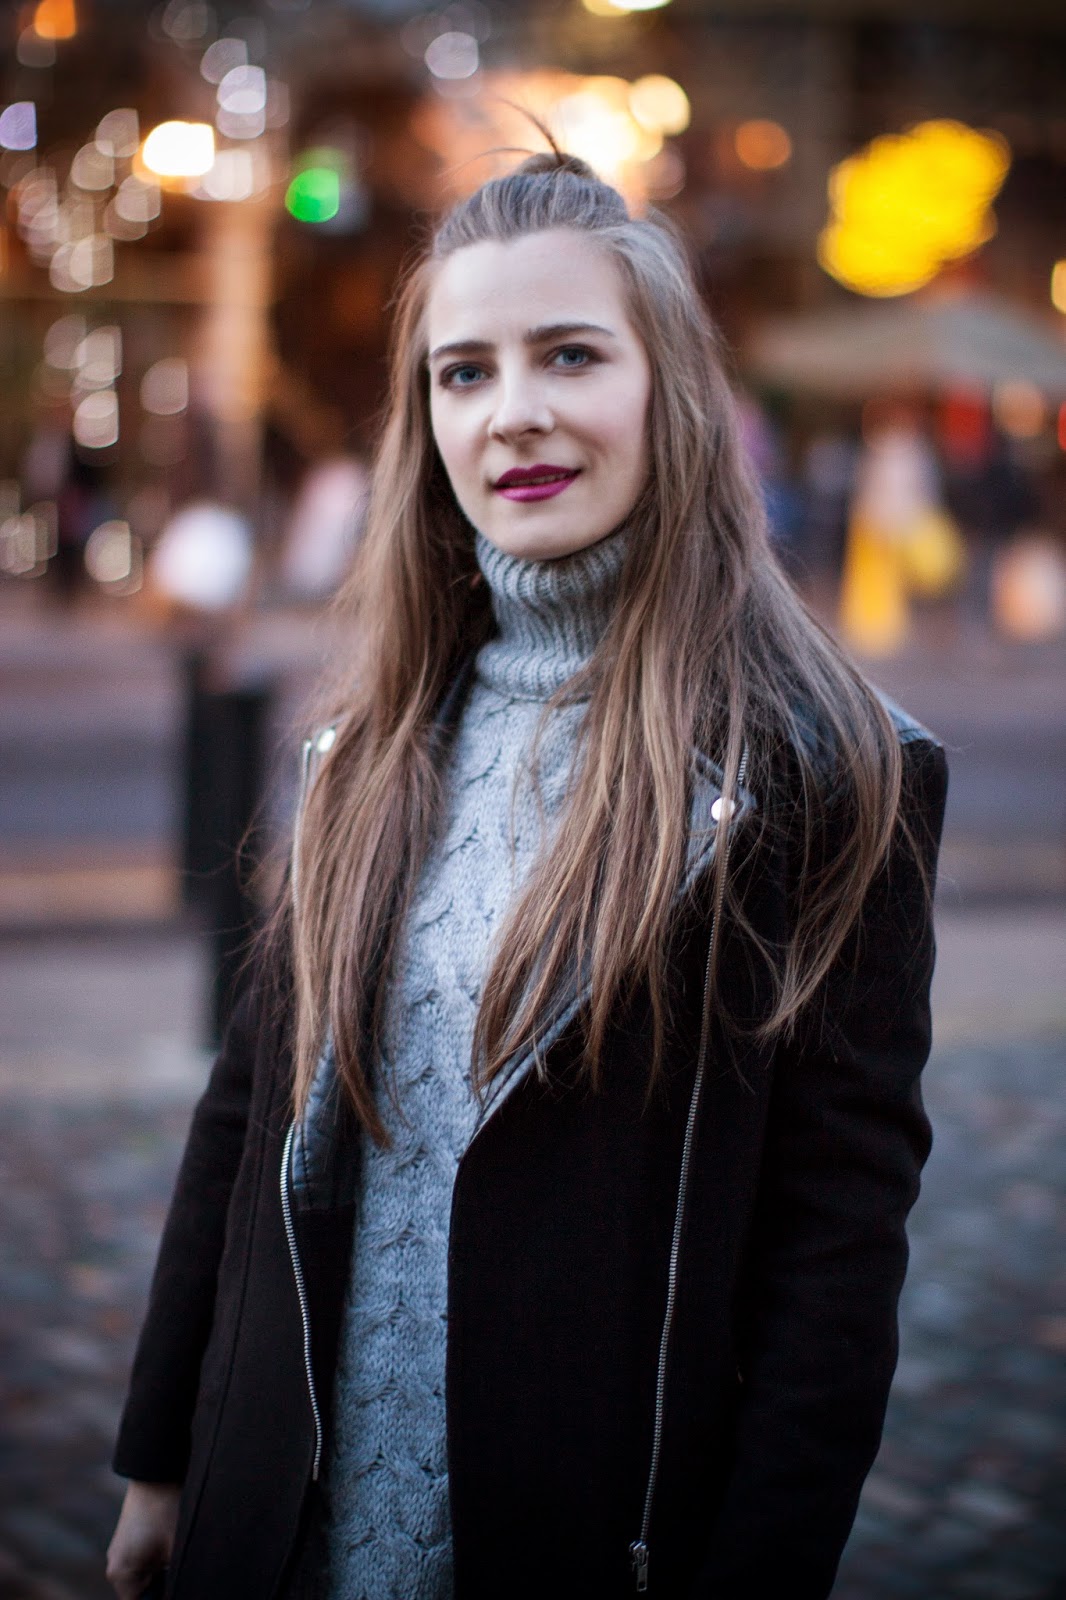 Fashion, Beauty & lifestyle blog - STYLE GAMBLERS : Cold in the city by ...